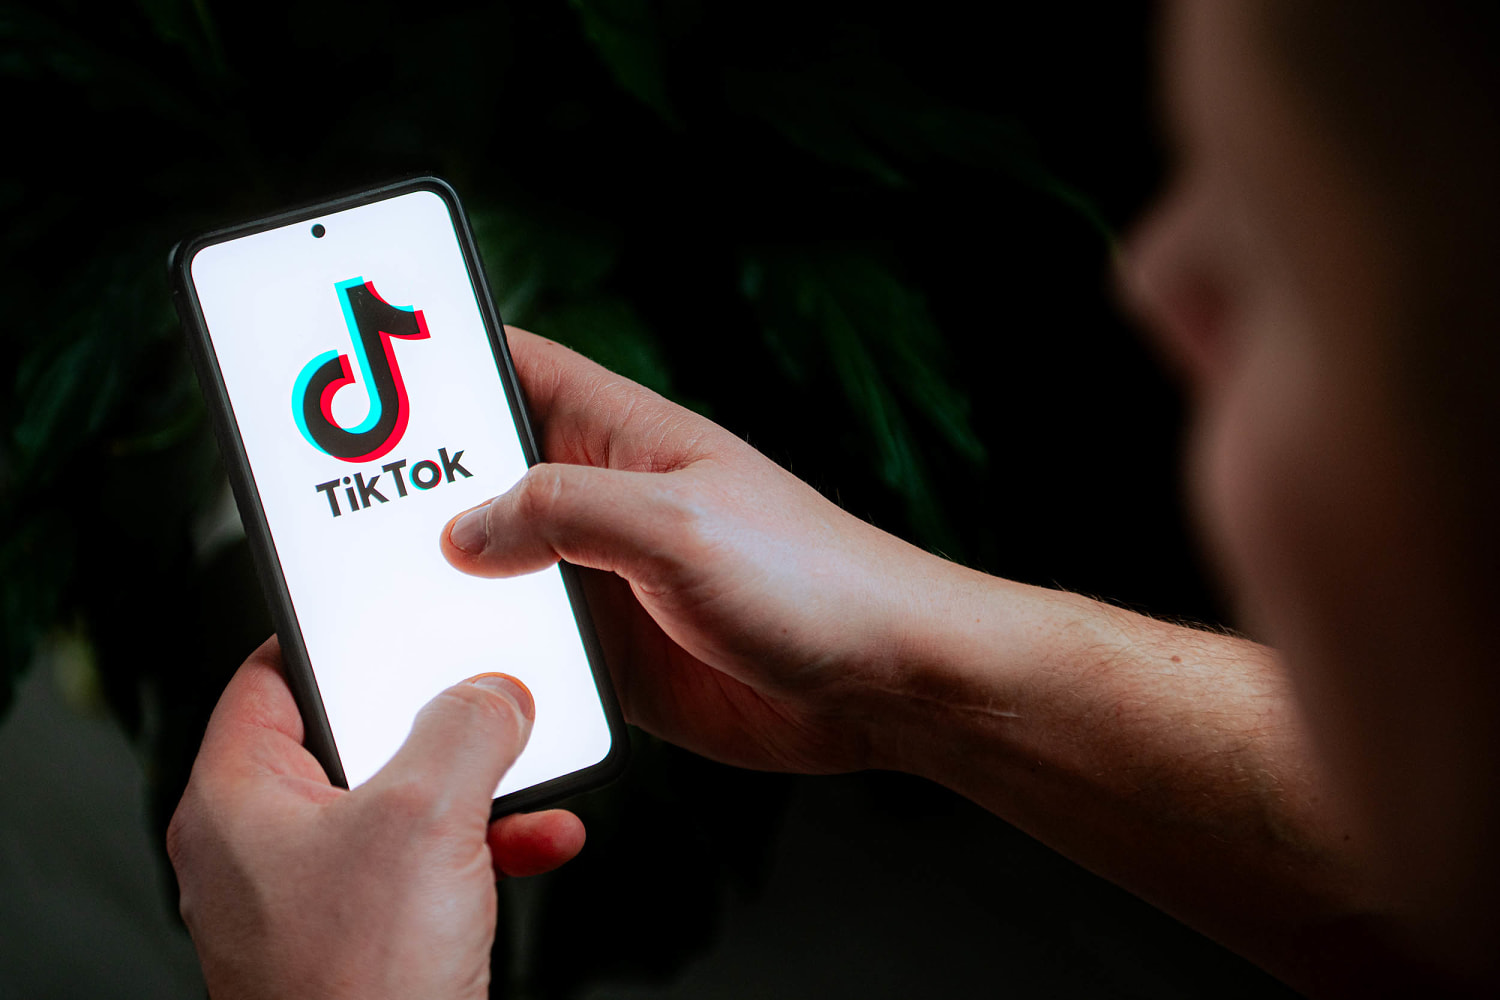 House committee advances bill that could ban TikTok in the U.S.